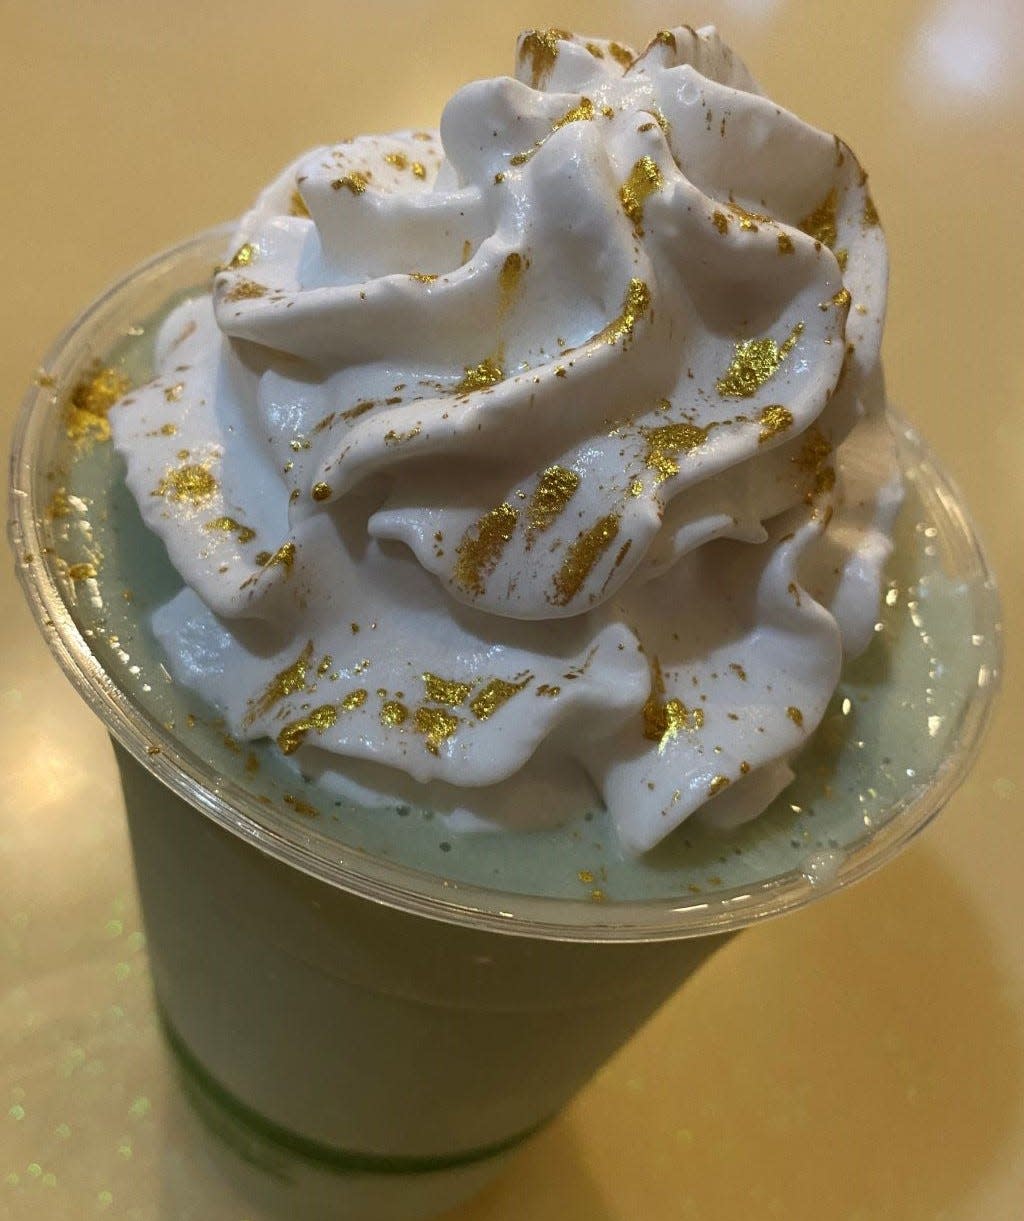 Like No Udder has a special Sham-Rock that is a light mint oat milk shake, topped with shop-made coconut whipped cream and a sprinkle of edible gold glitter. It will only be sold the next two weekends.